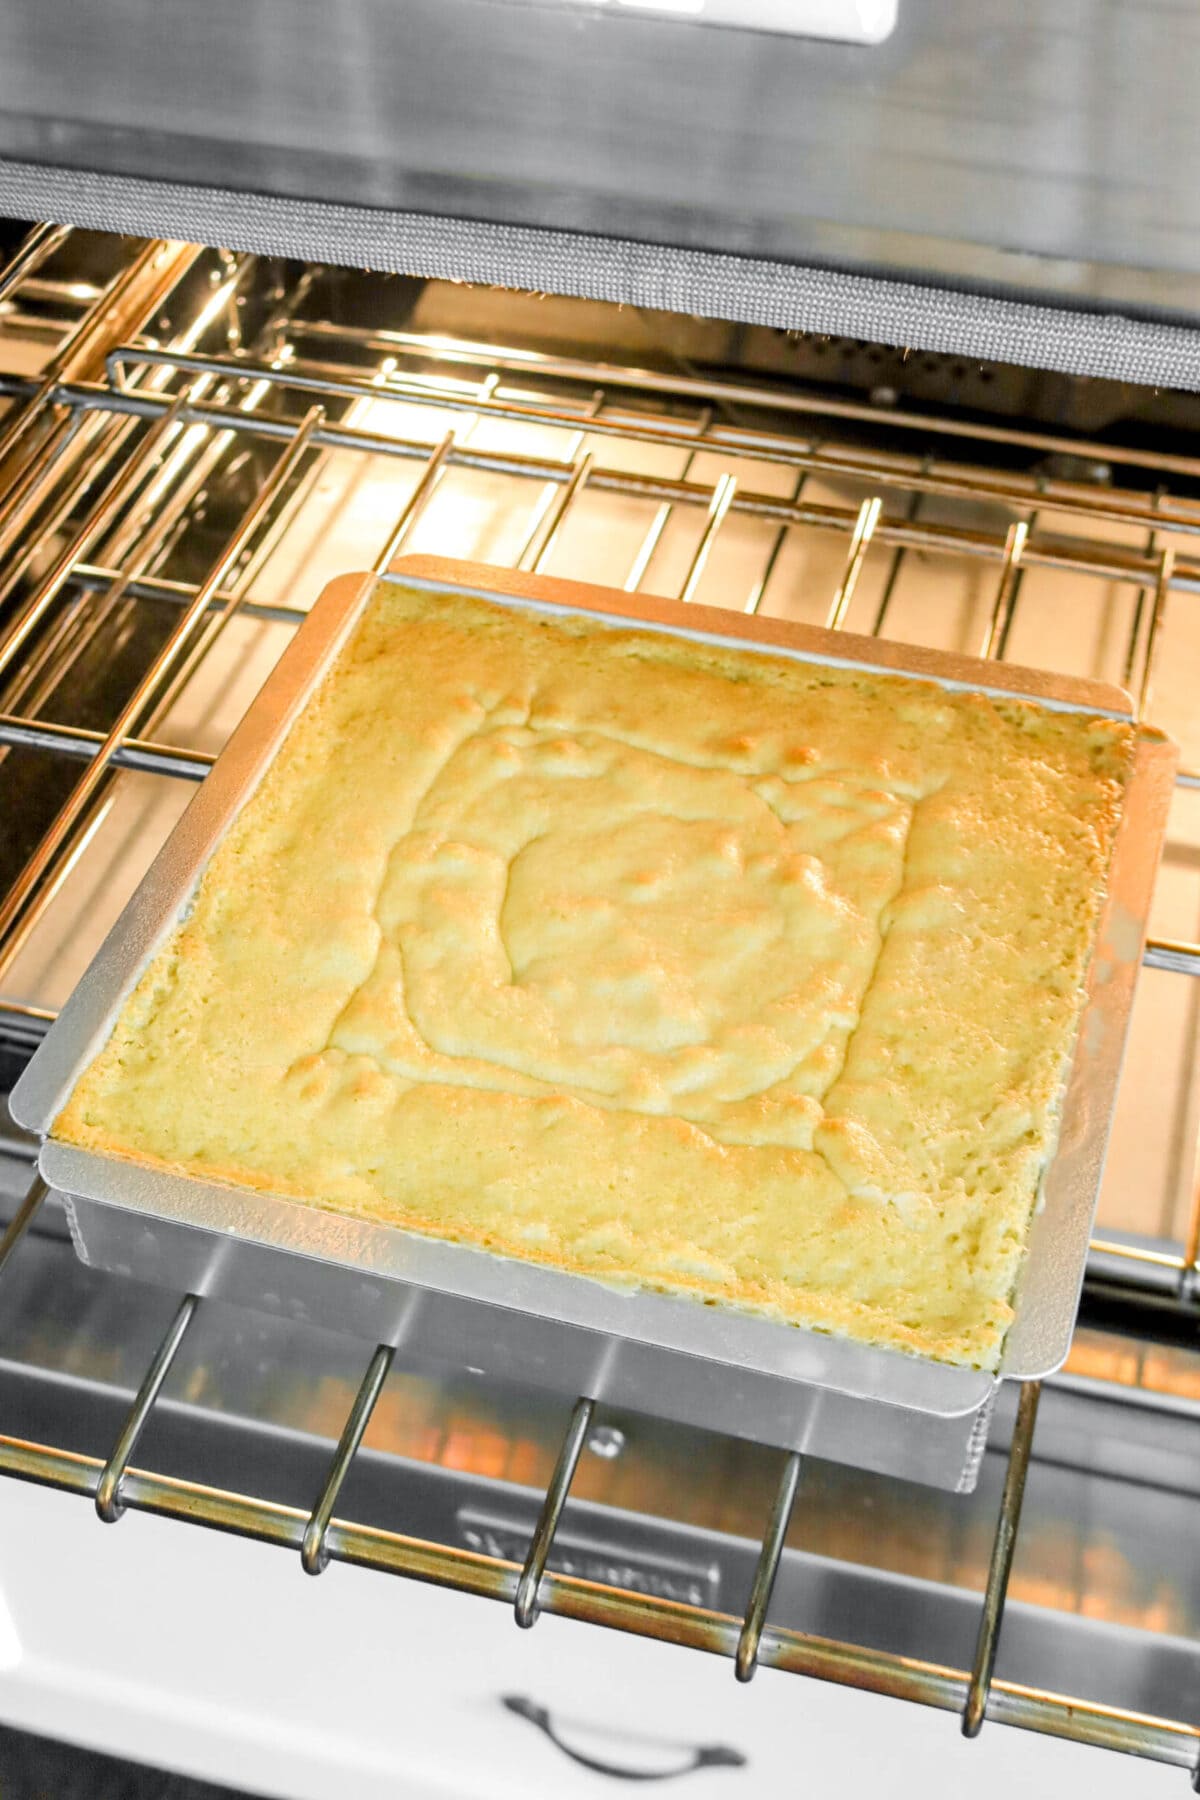 partially baked cake on oven rack